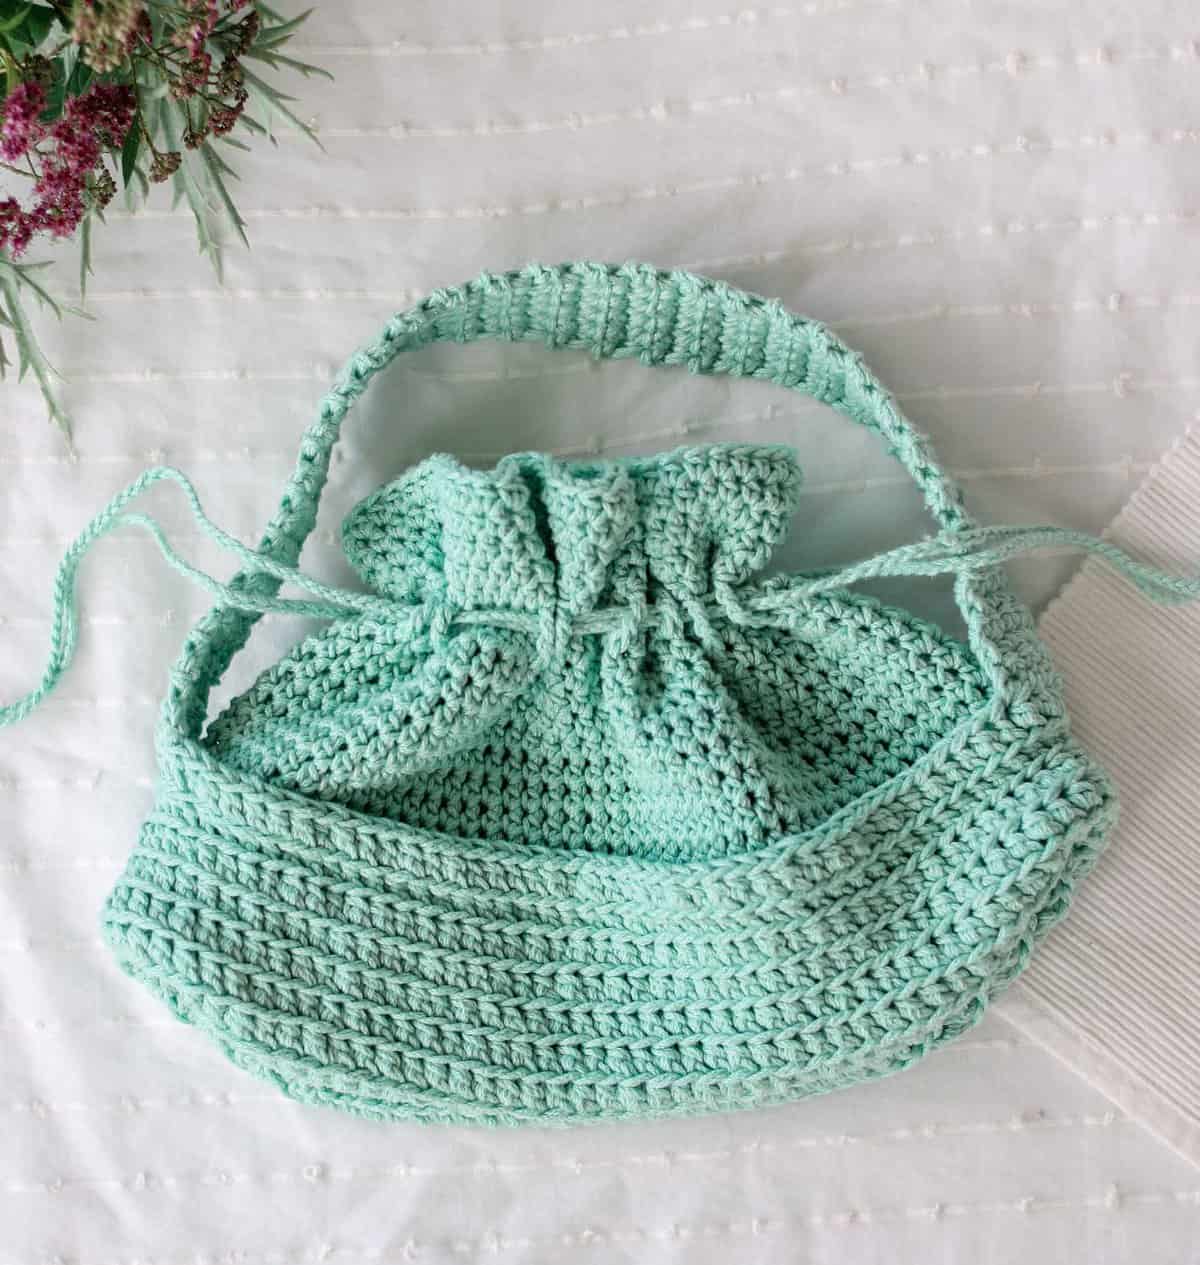 This quick, sturdy cotton bag makes a perfect kids purse or crochet lunch bag! Free pattern and detailed tutorial.